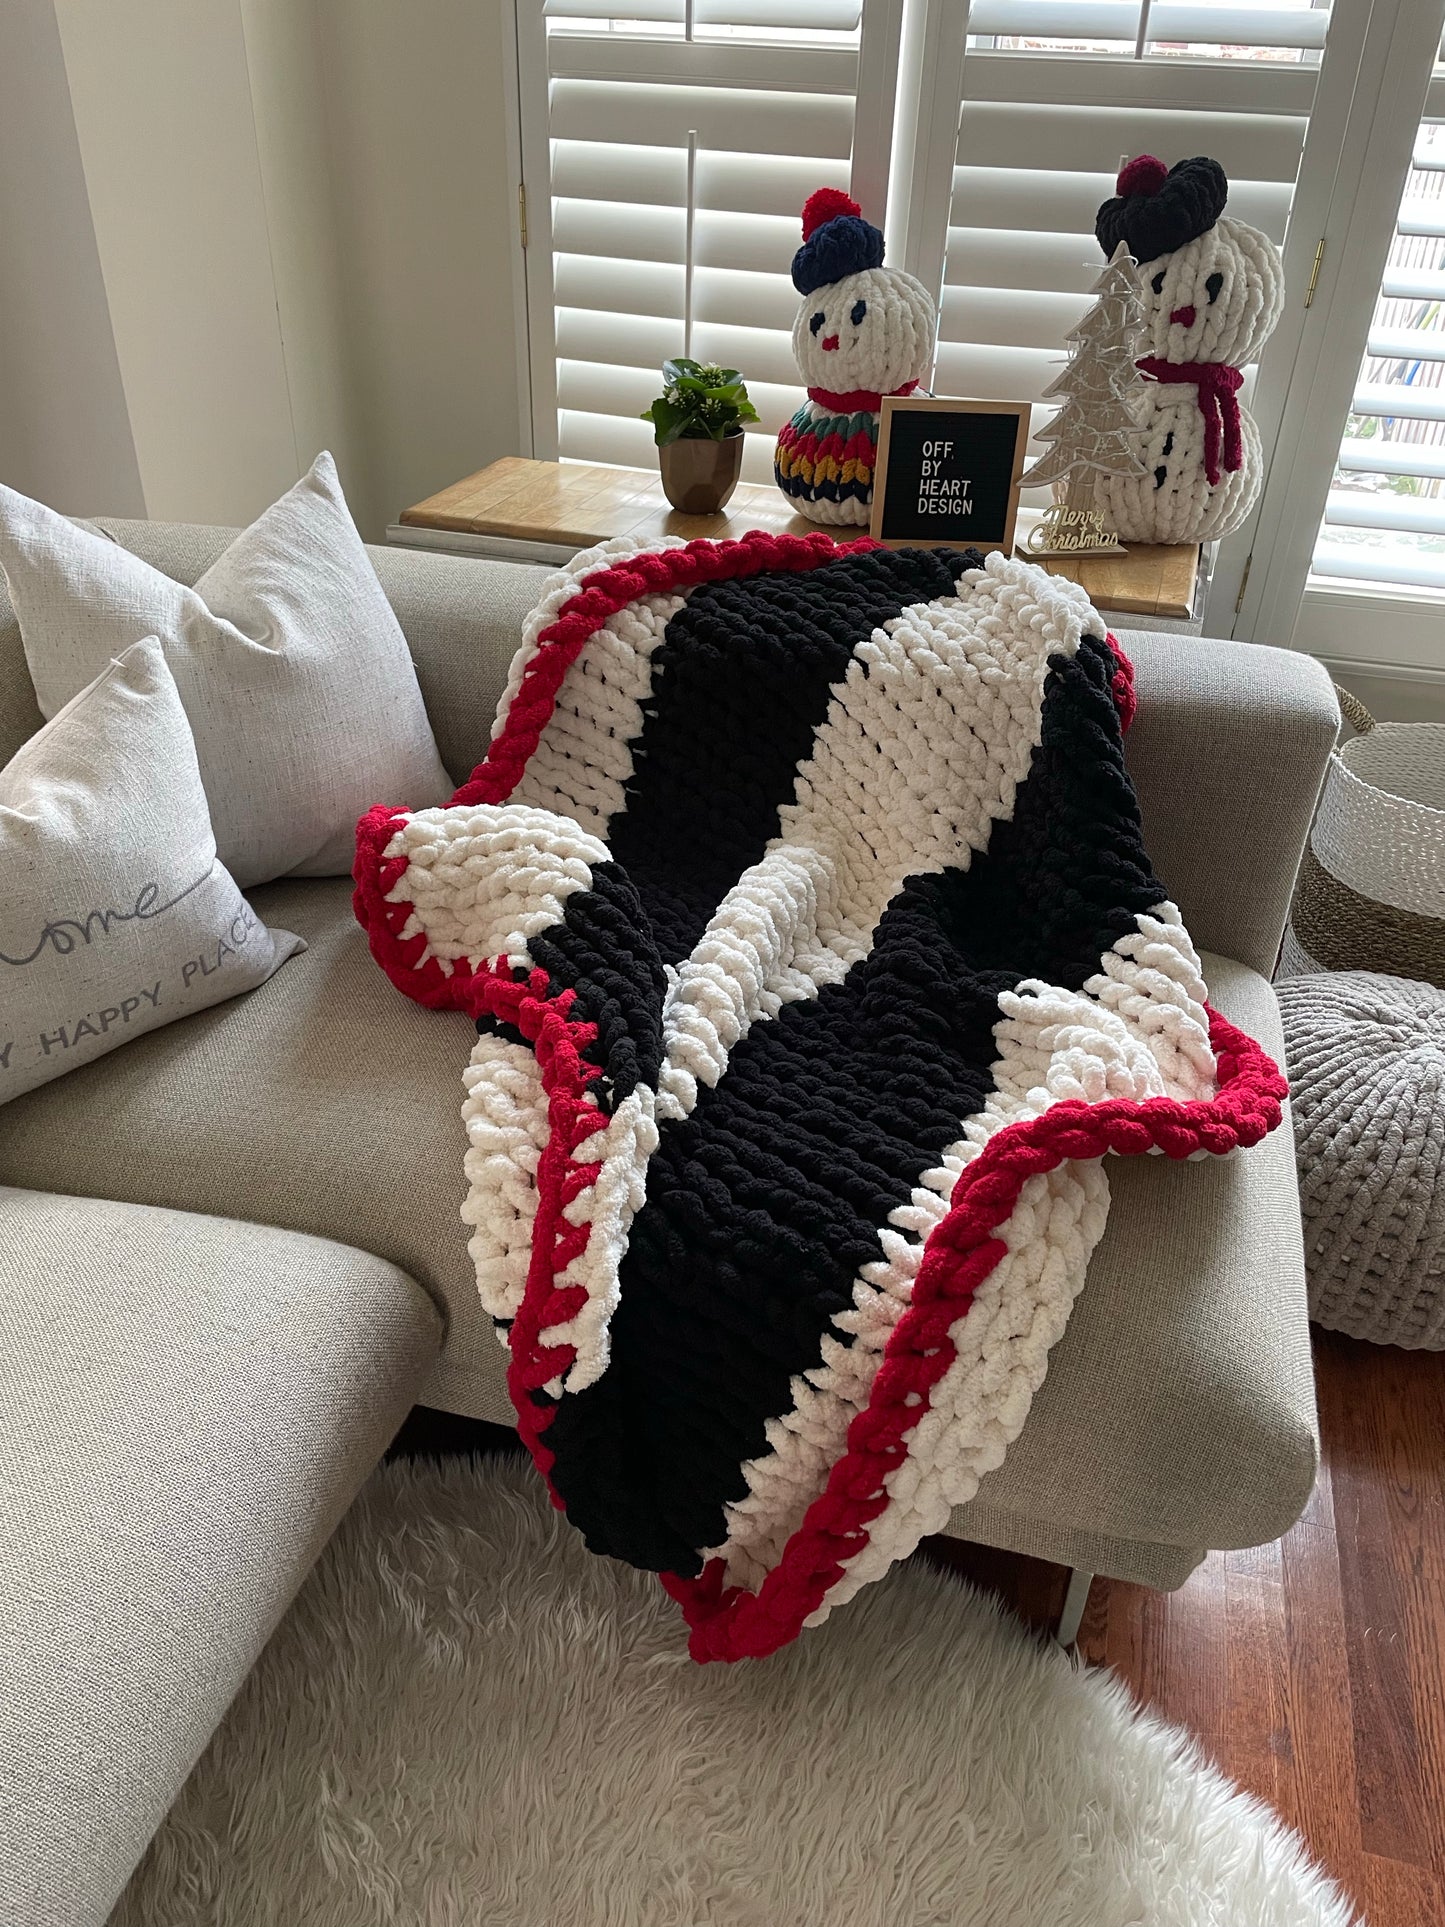 Healing Hand, Chunky Knit Blankets Black & White Stripe with Red Edge